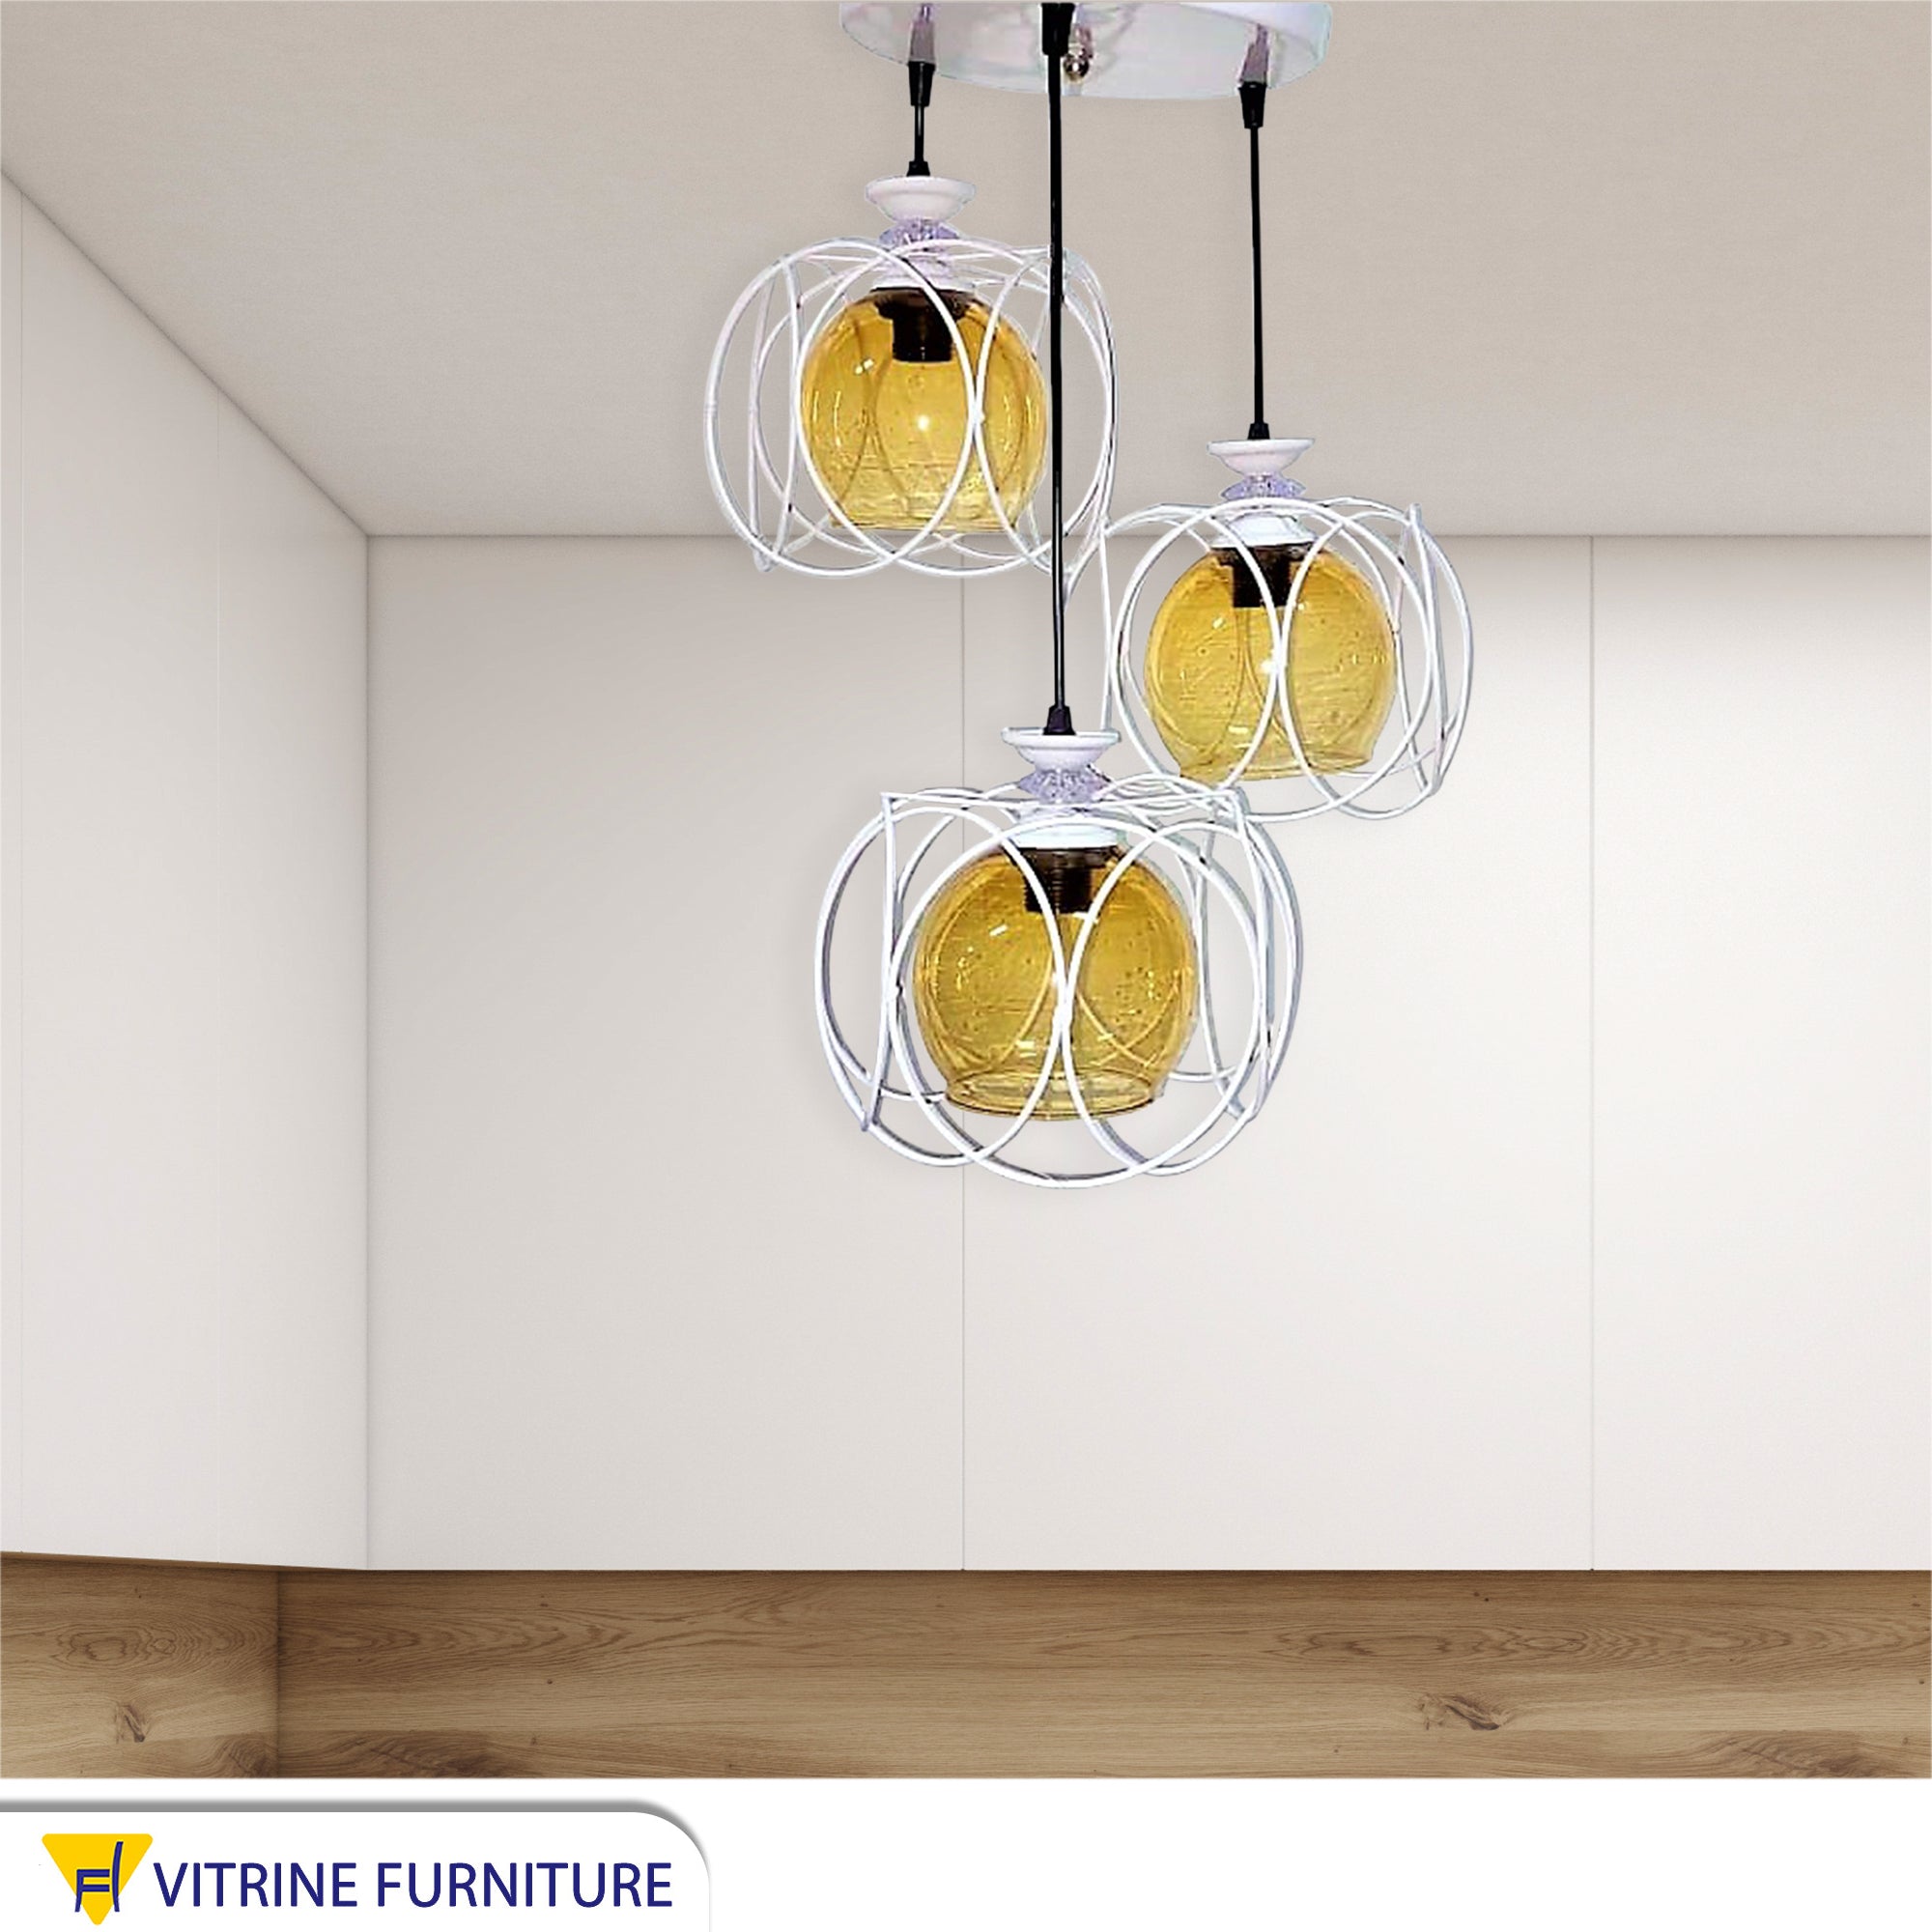 Three Pendant ceiling lamps, white metal and glass